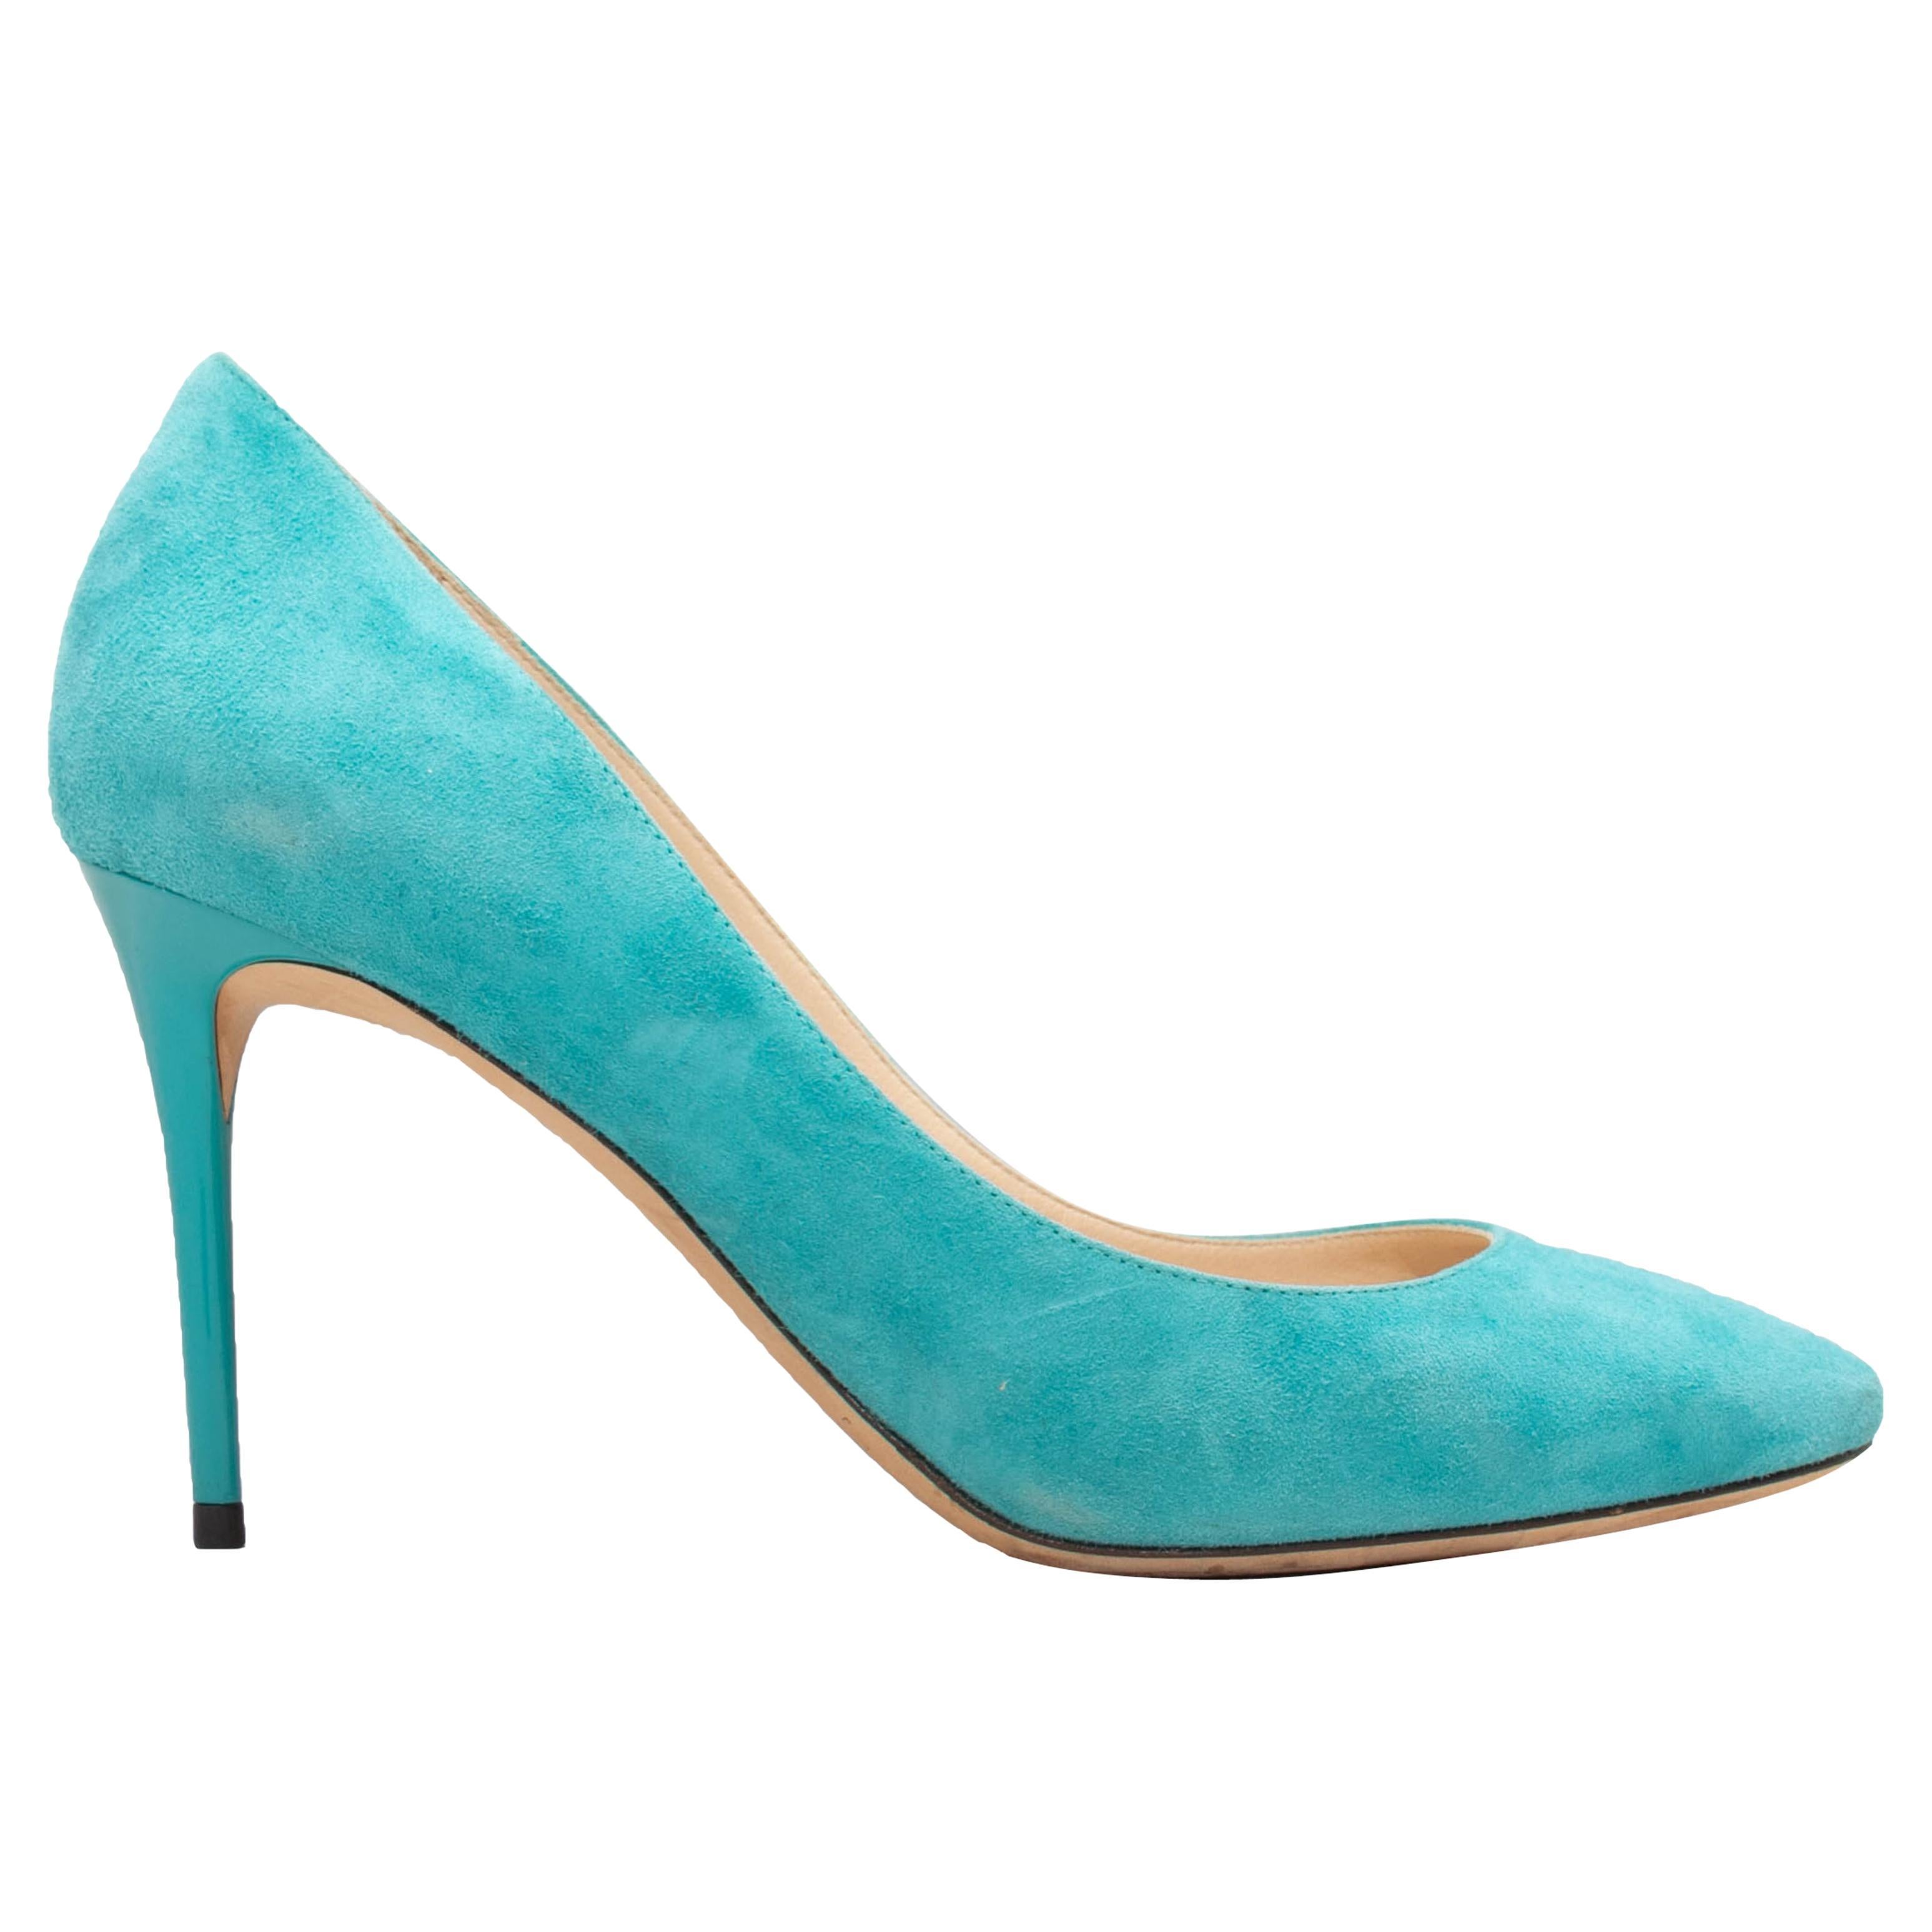 Turquoise Jimmy Choo Esme Suede Pumps Size 6.5 For Sale